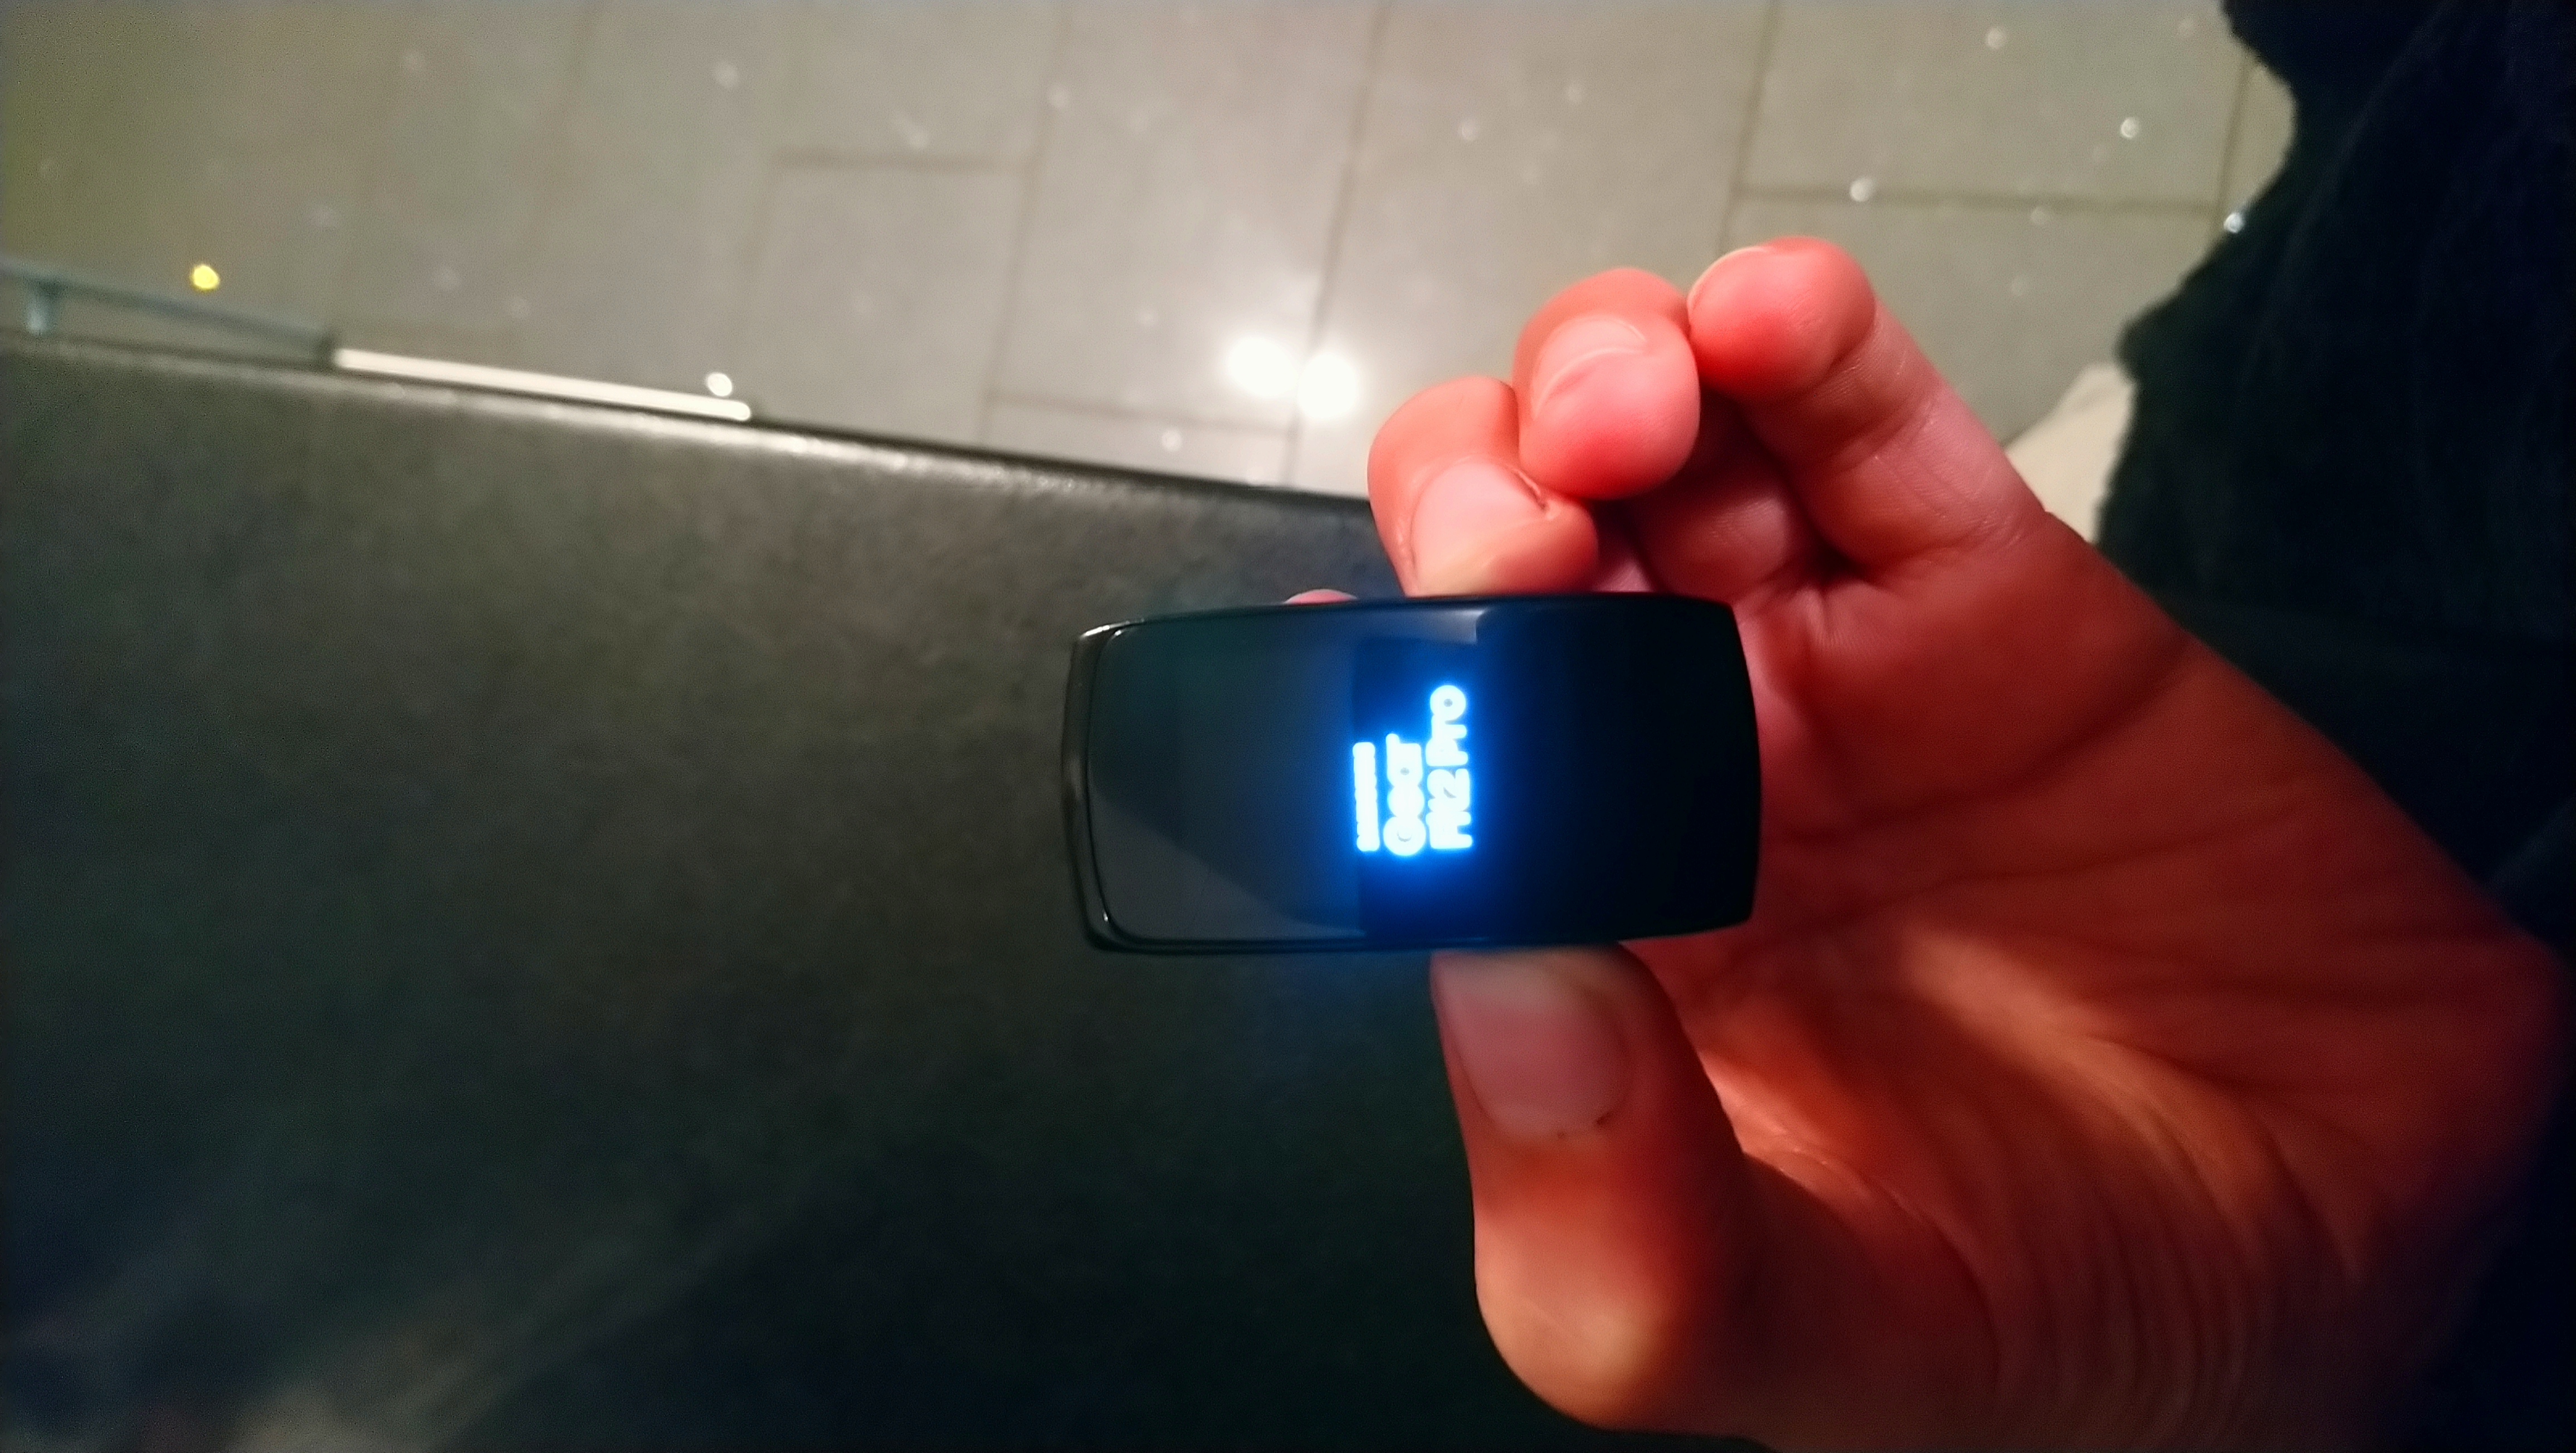 Solved: Gear fit2 pro wont turn on. - Samsung Community - 1263823